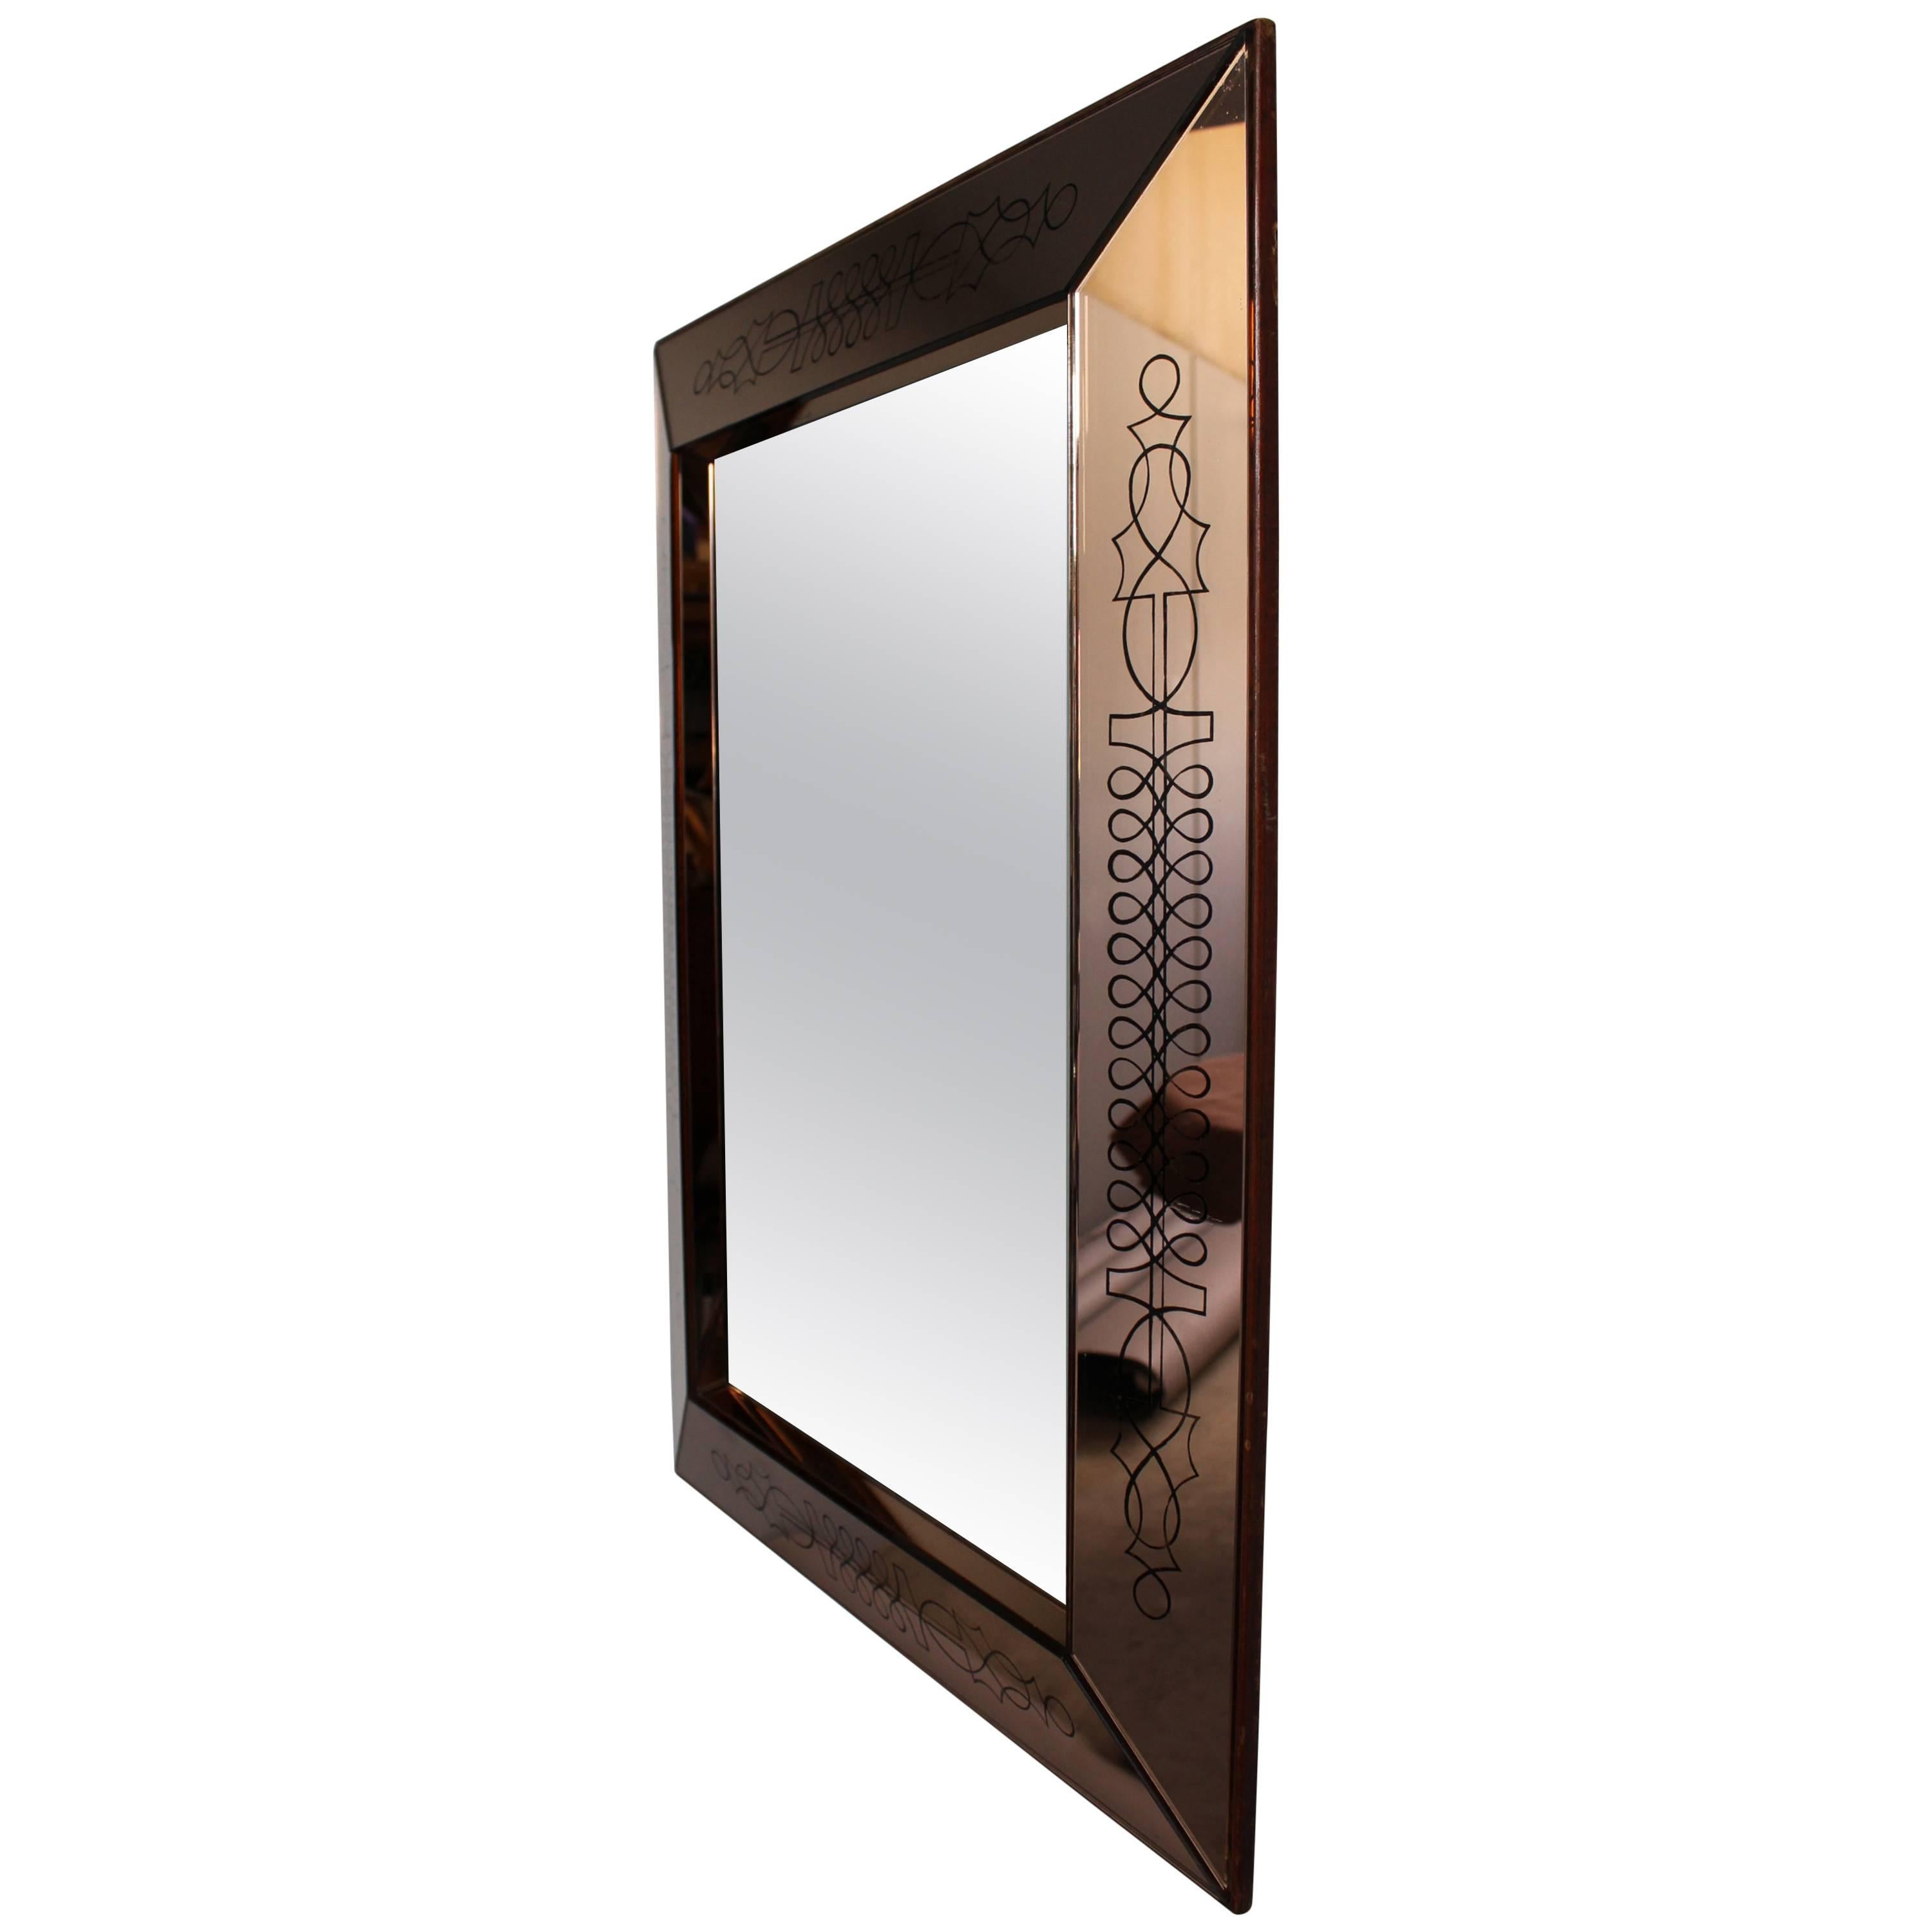 A Fine French Art Deco Rectangular Mirror by Max Ingrand